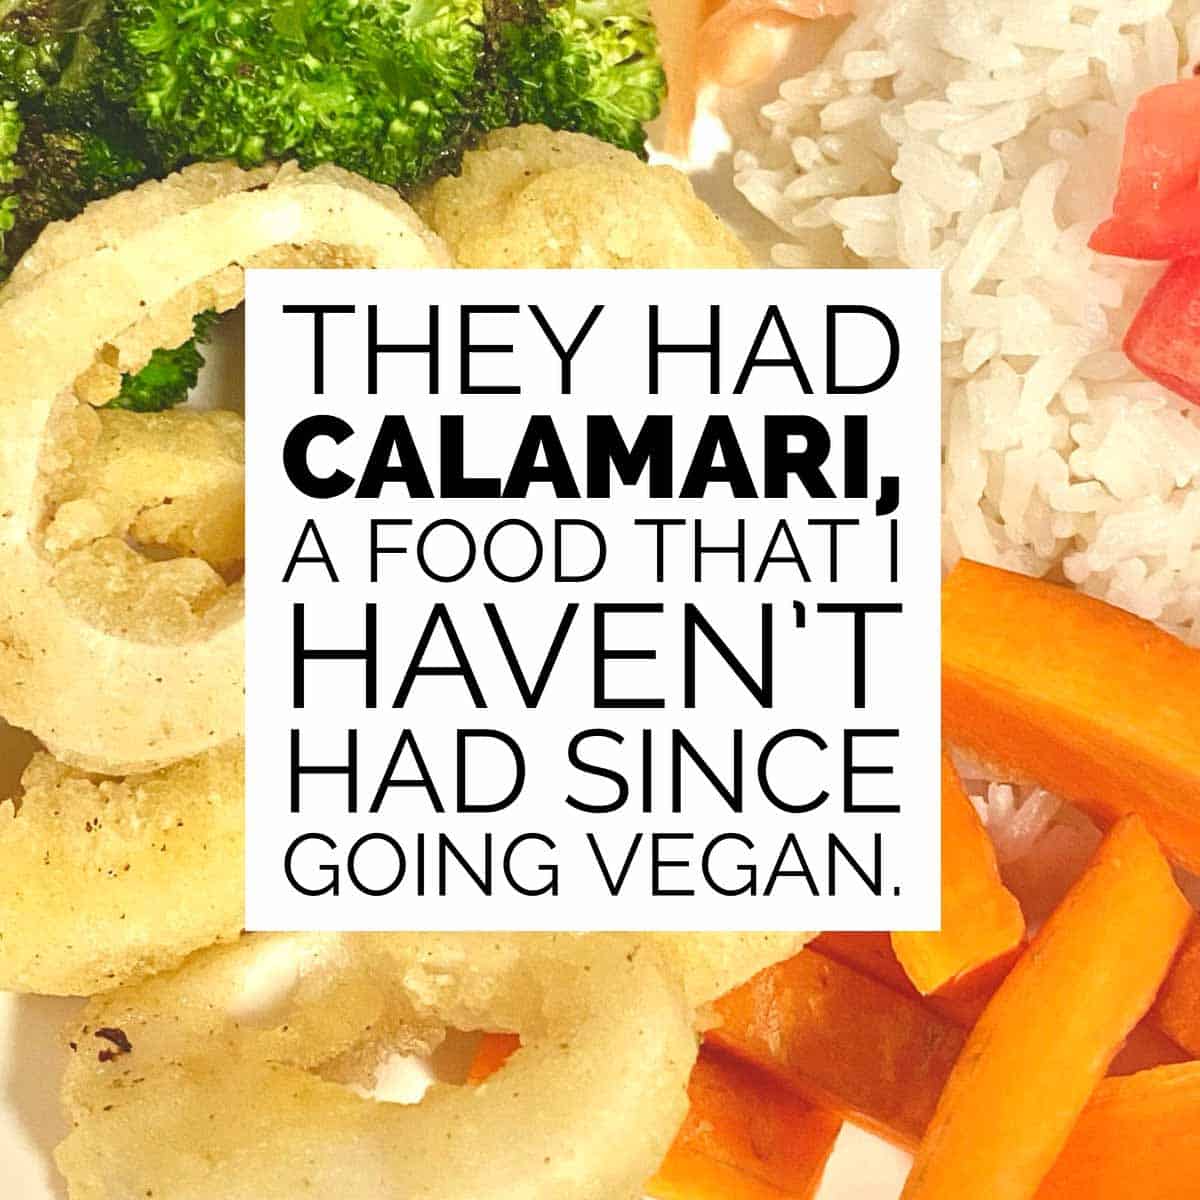 photo of vegan Zeastar calamari with text that reads, "They had calamari, a food that I haven't had since going vegan."